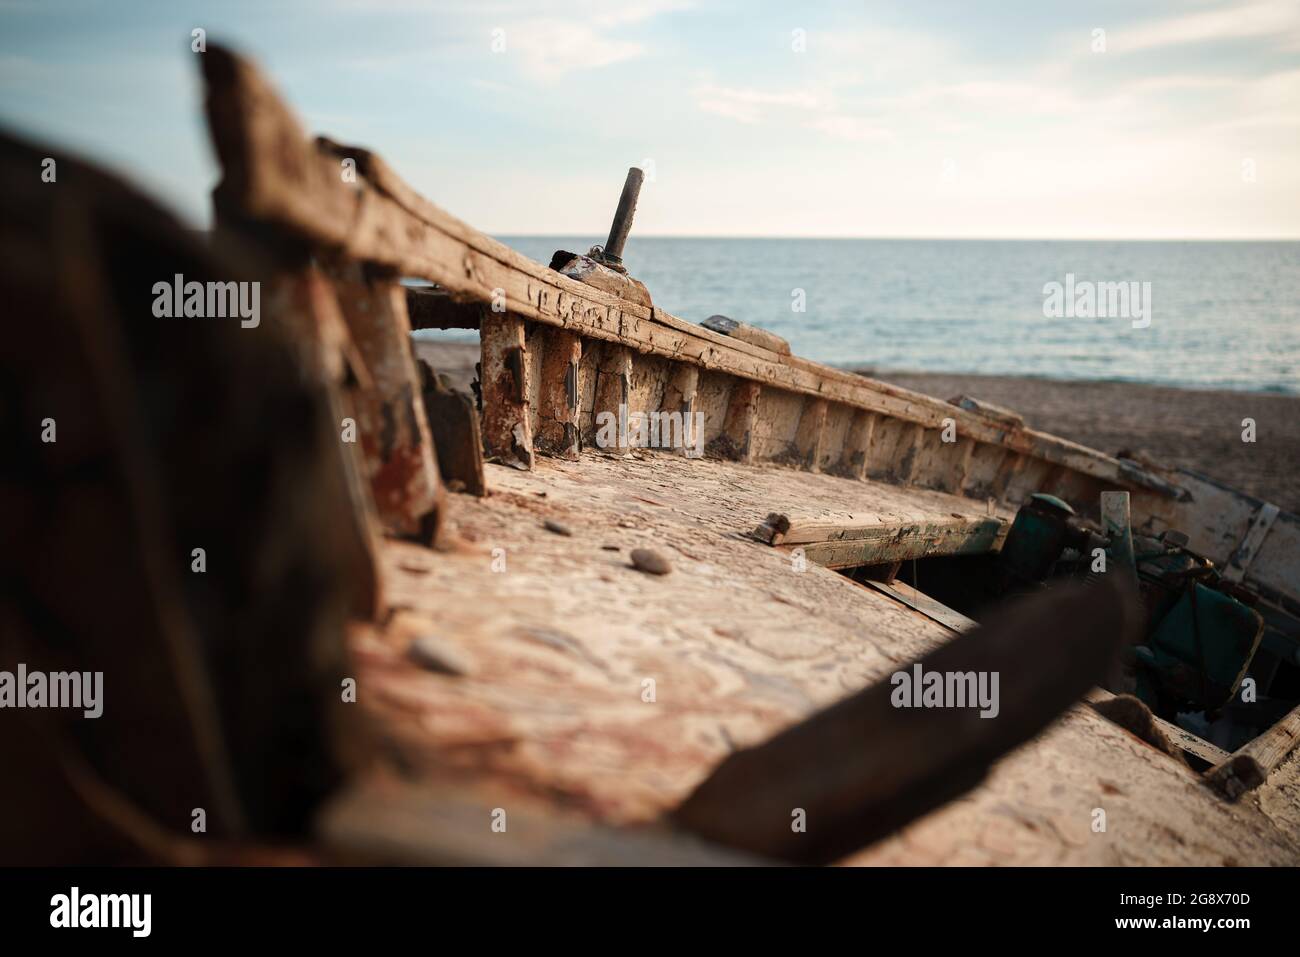 Old wooden boat abandoned. Shallow depth of field. Stock Photo